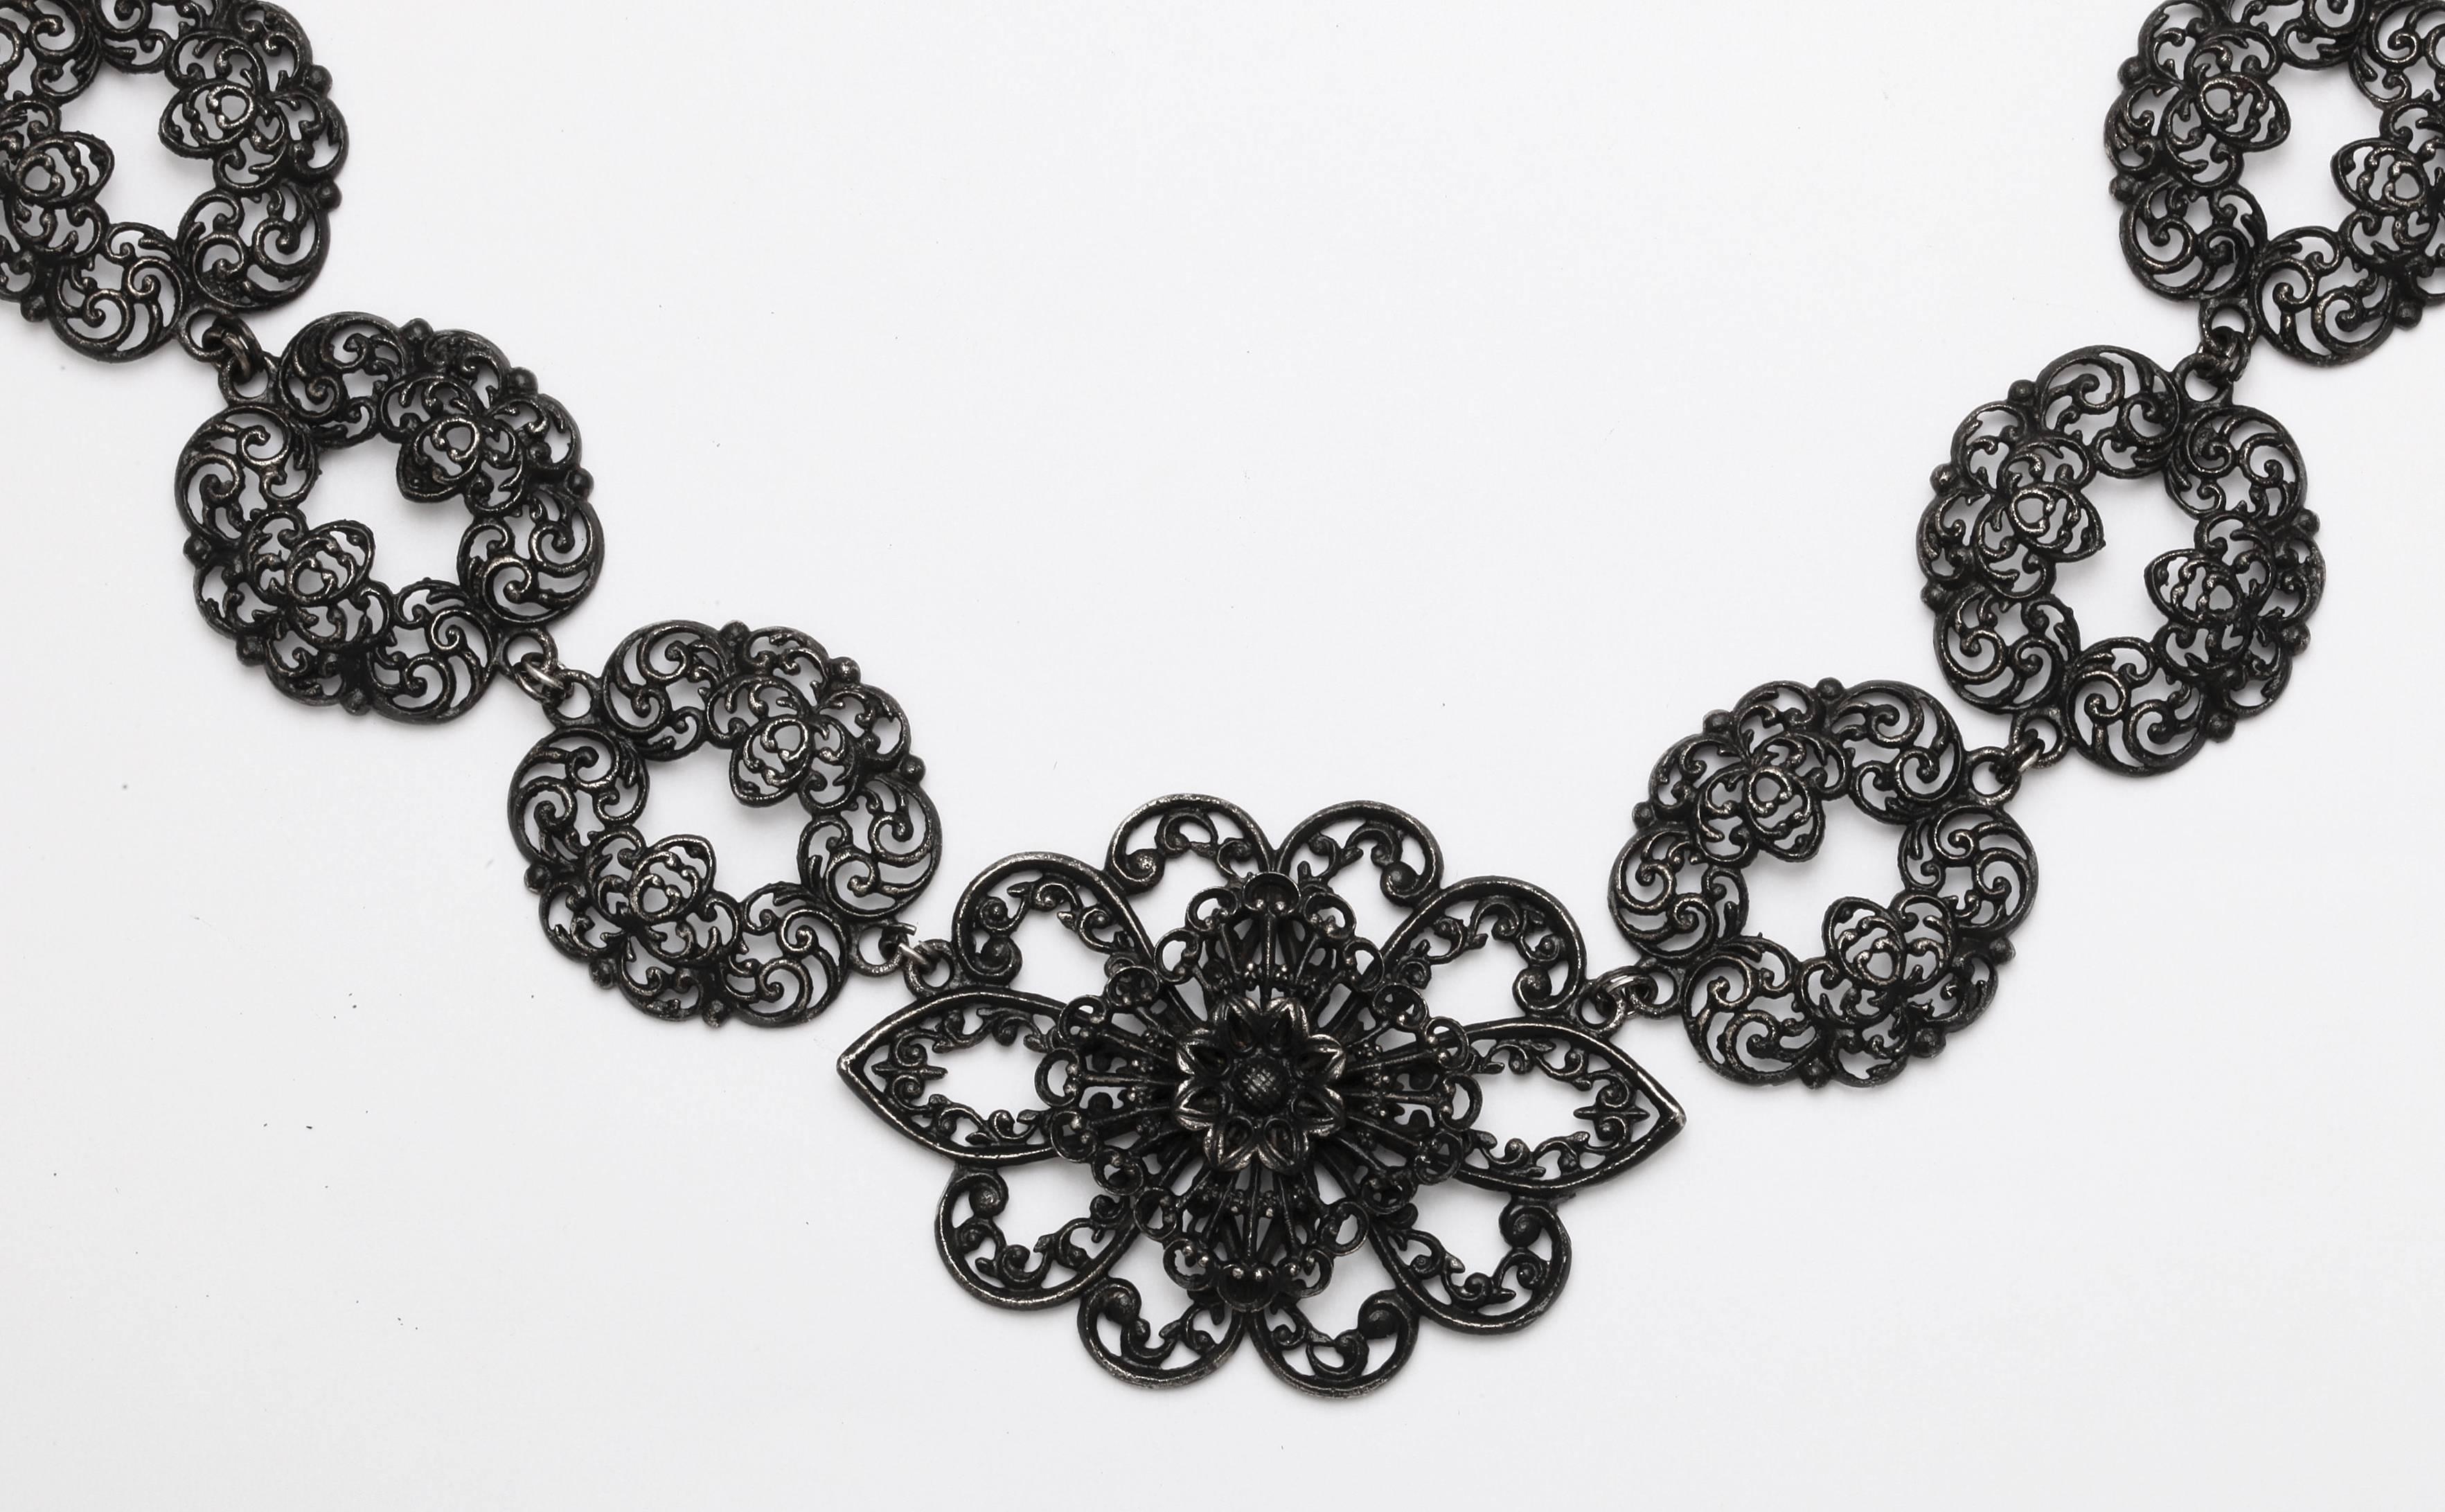 We study the intricacy of this rare Berlin Iron necklace from the early 19th century in thrill and awe. Orderly tangles of iron vines dance in circles reminiscent of Matisse's painting 